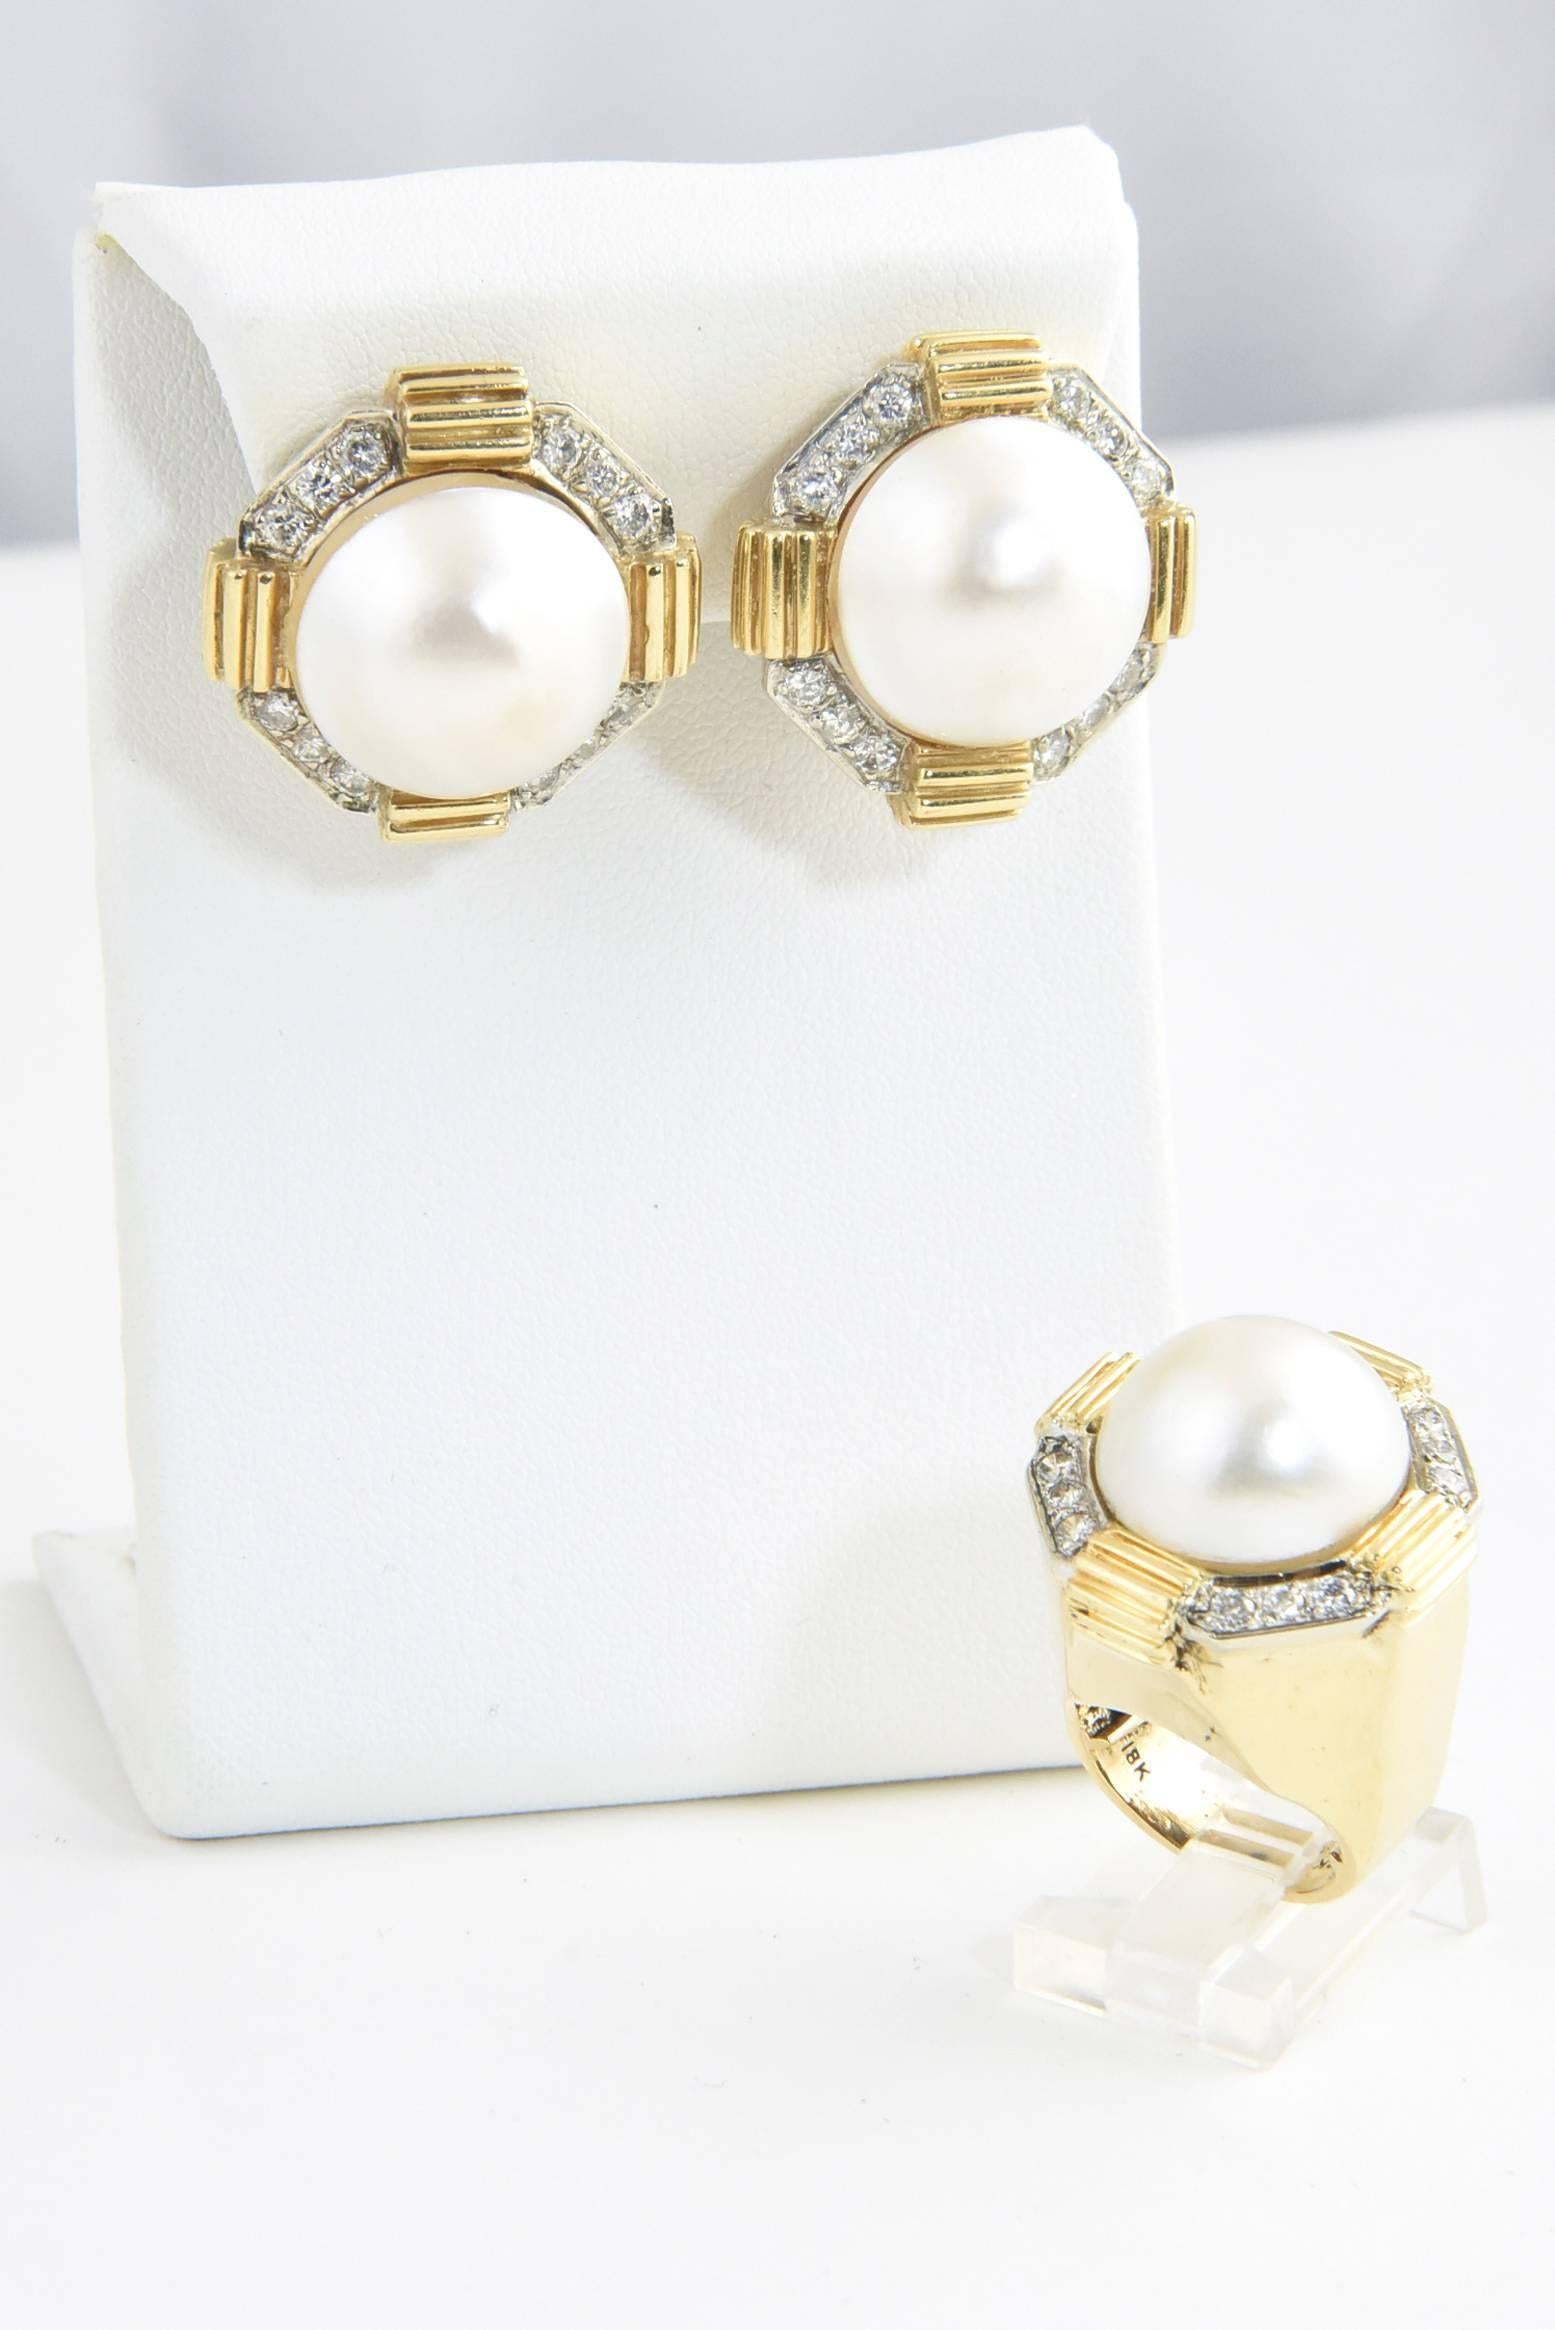 Stunning 18k yellow and white gold mabe pearl and diamond earrings and ring. The mabe pearls in the earrings are 18 mm and in the ring 16mm. Around each mabe pearl, there are twelve round brilliant cut diamonds measuring approximately .06 carats